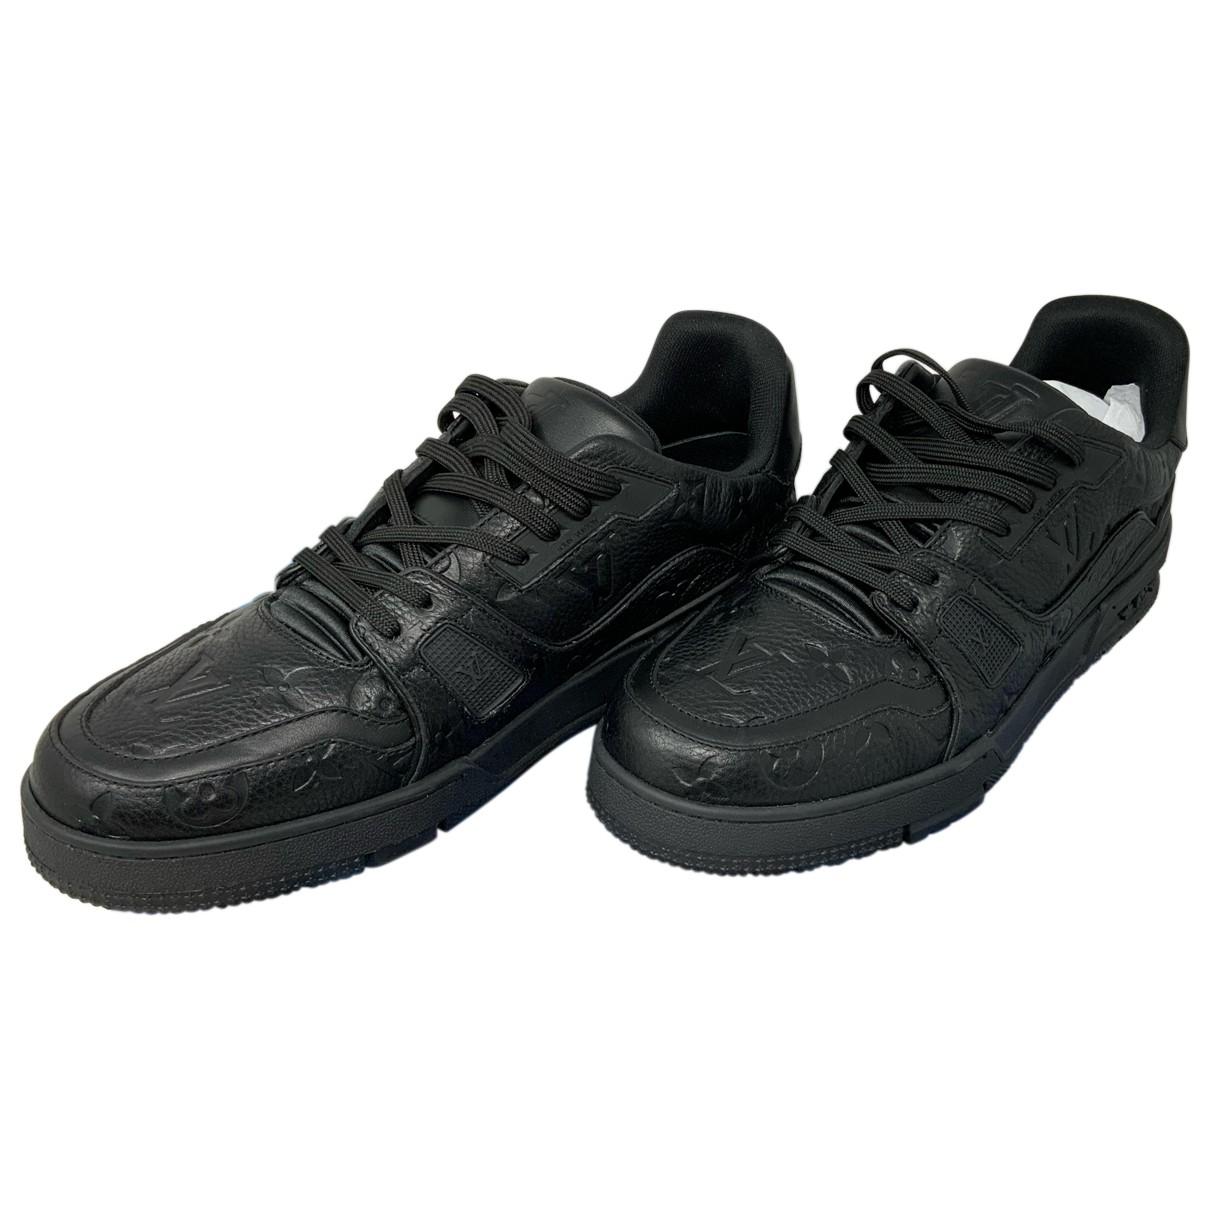 Lv trainer leather low trainers Louis Vuitton Black size 10 UK in Leather -  19281898